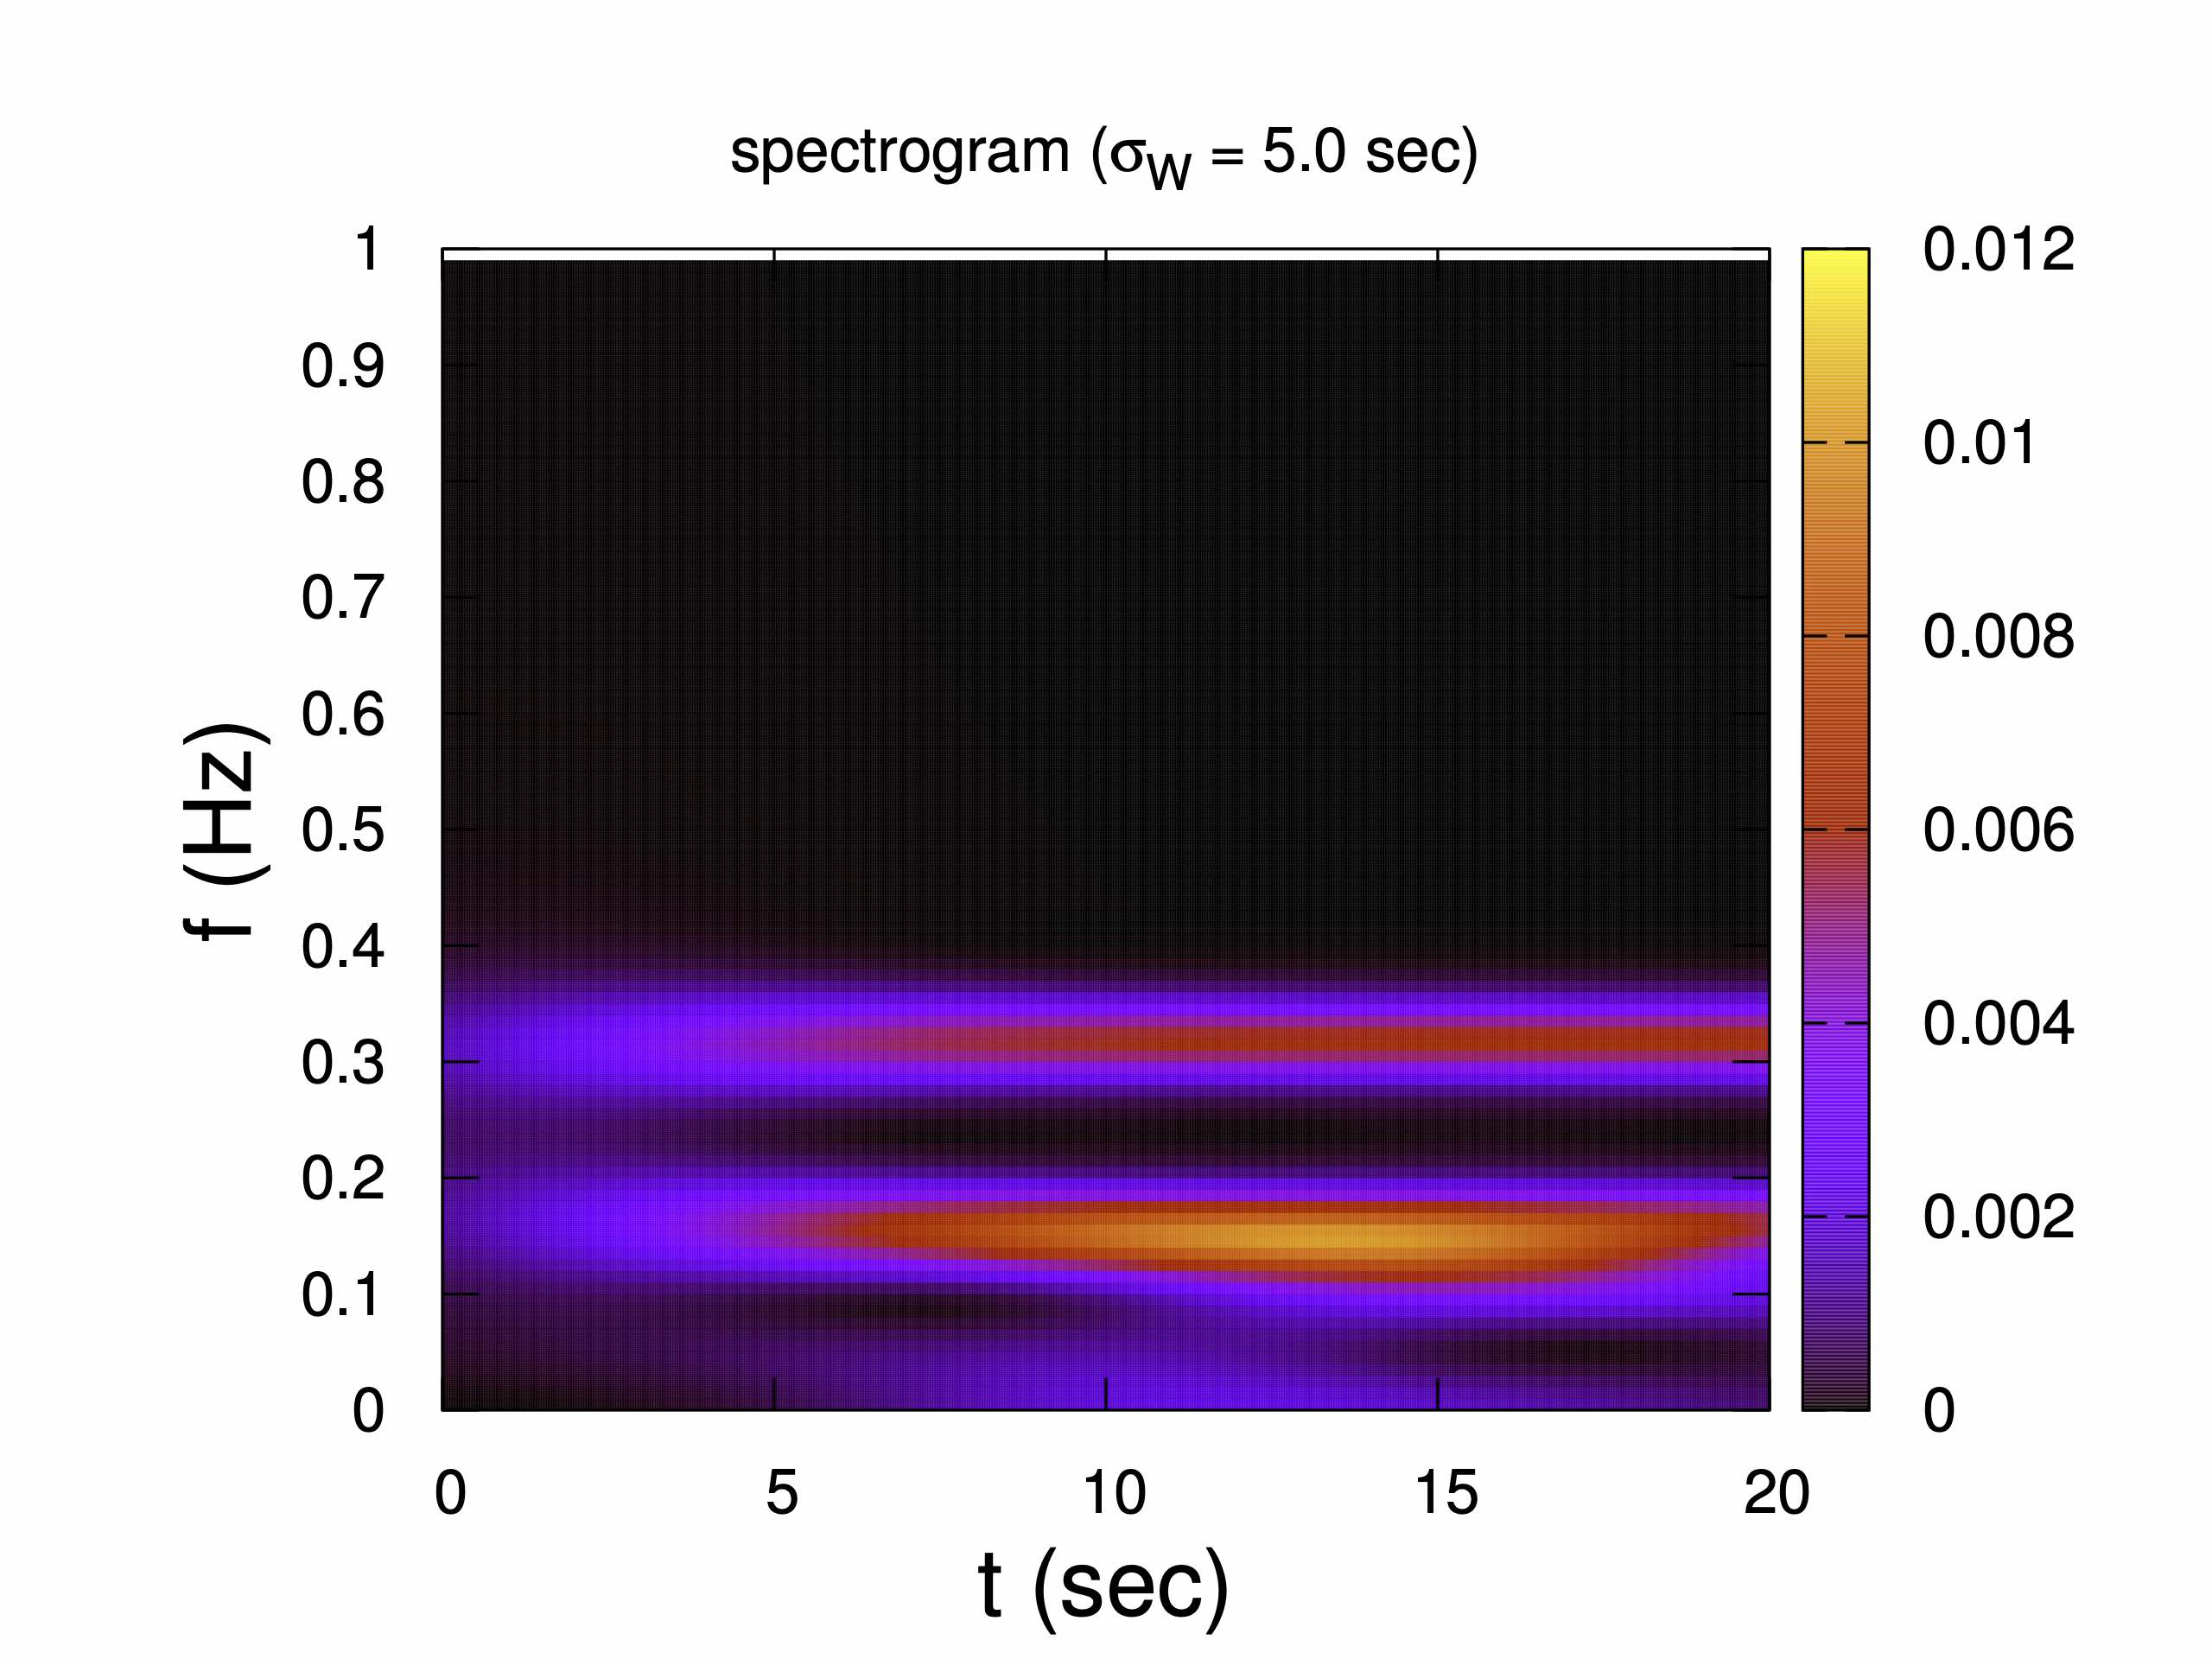 spectrogram of the example signal and a wide window function